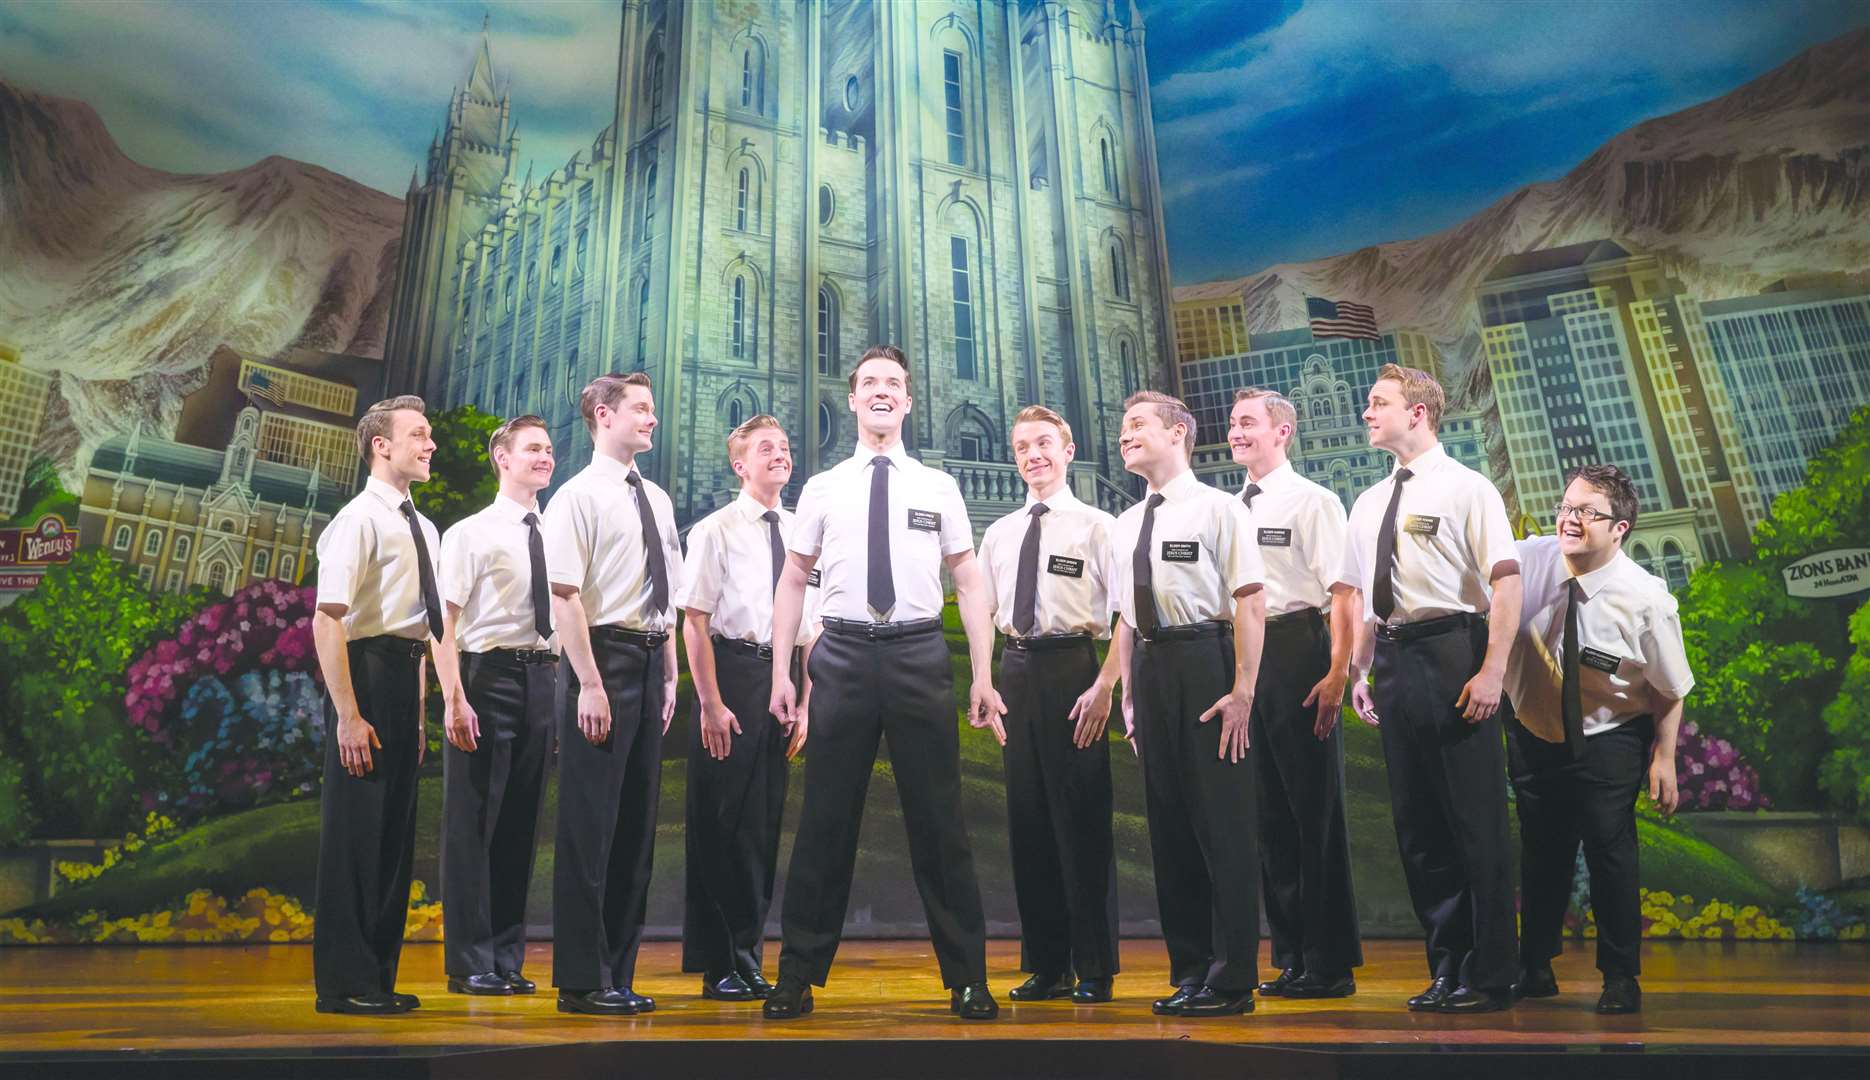 First staged in 2011, the play is a satirical examination of The Church of Jesus Christ of Latter-Day Saints' beliefs and practices that ultimately endorses the positive power of love and service.